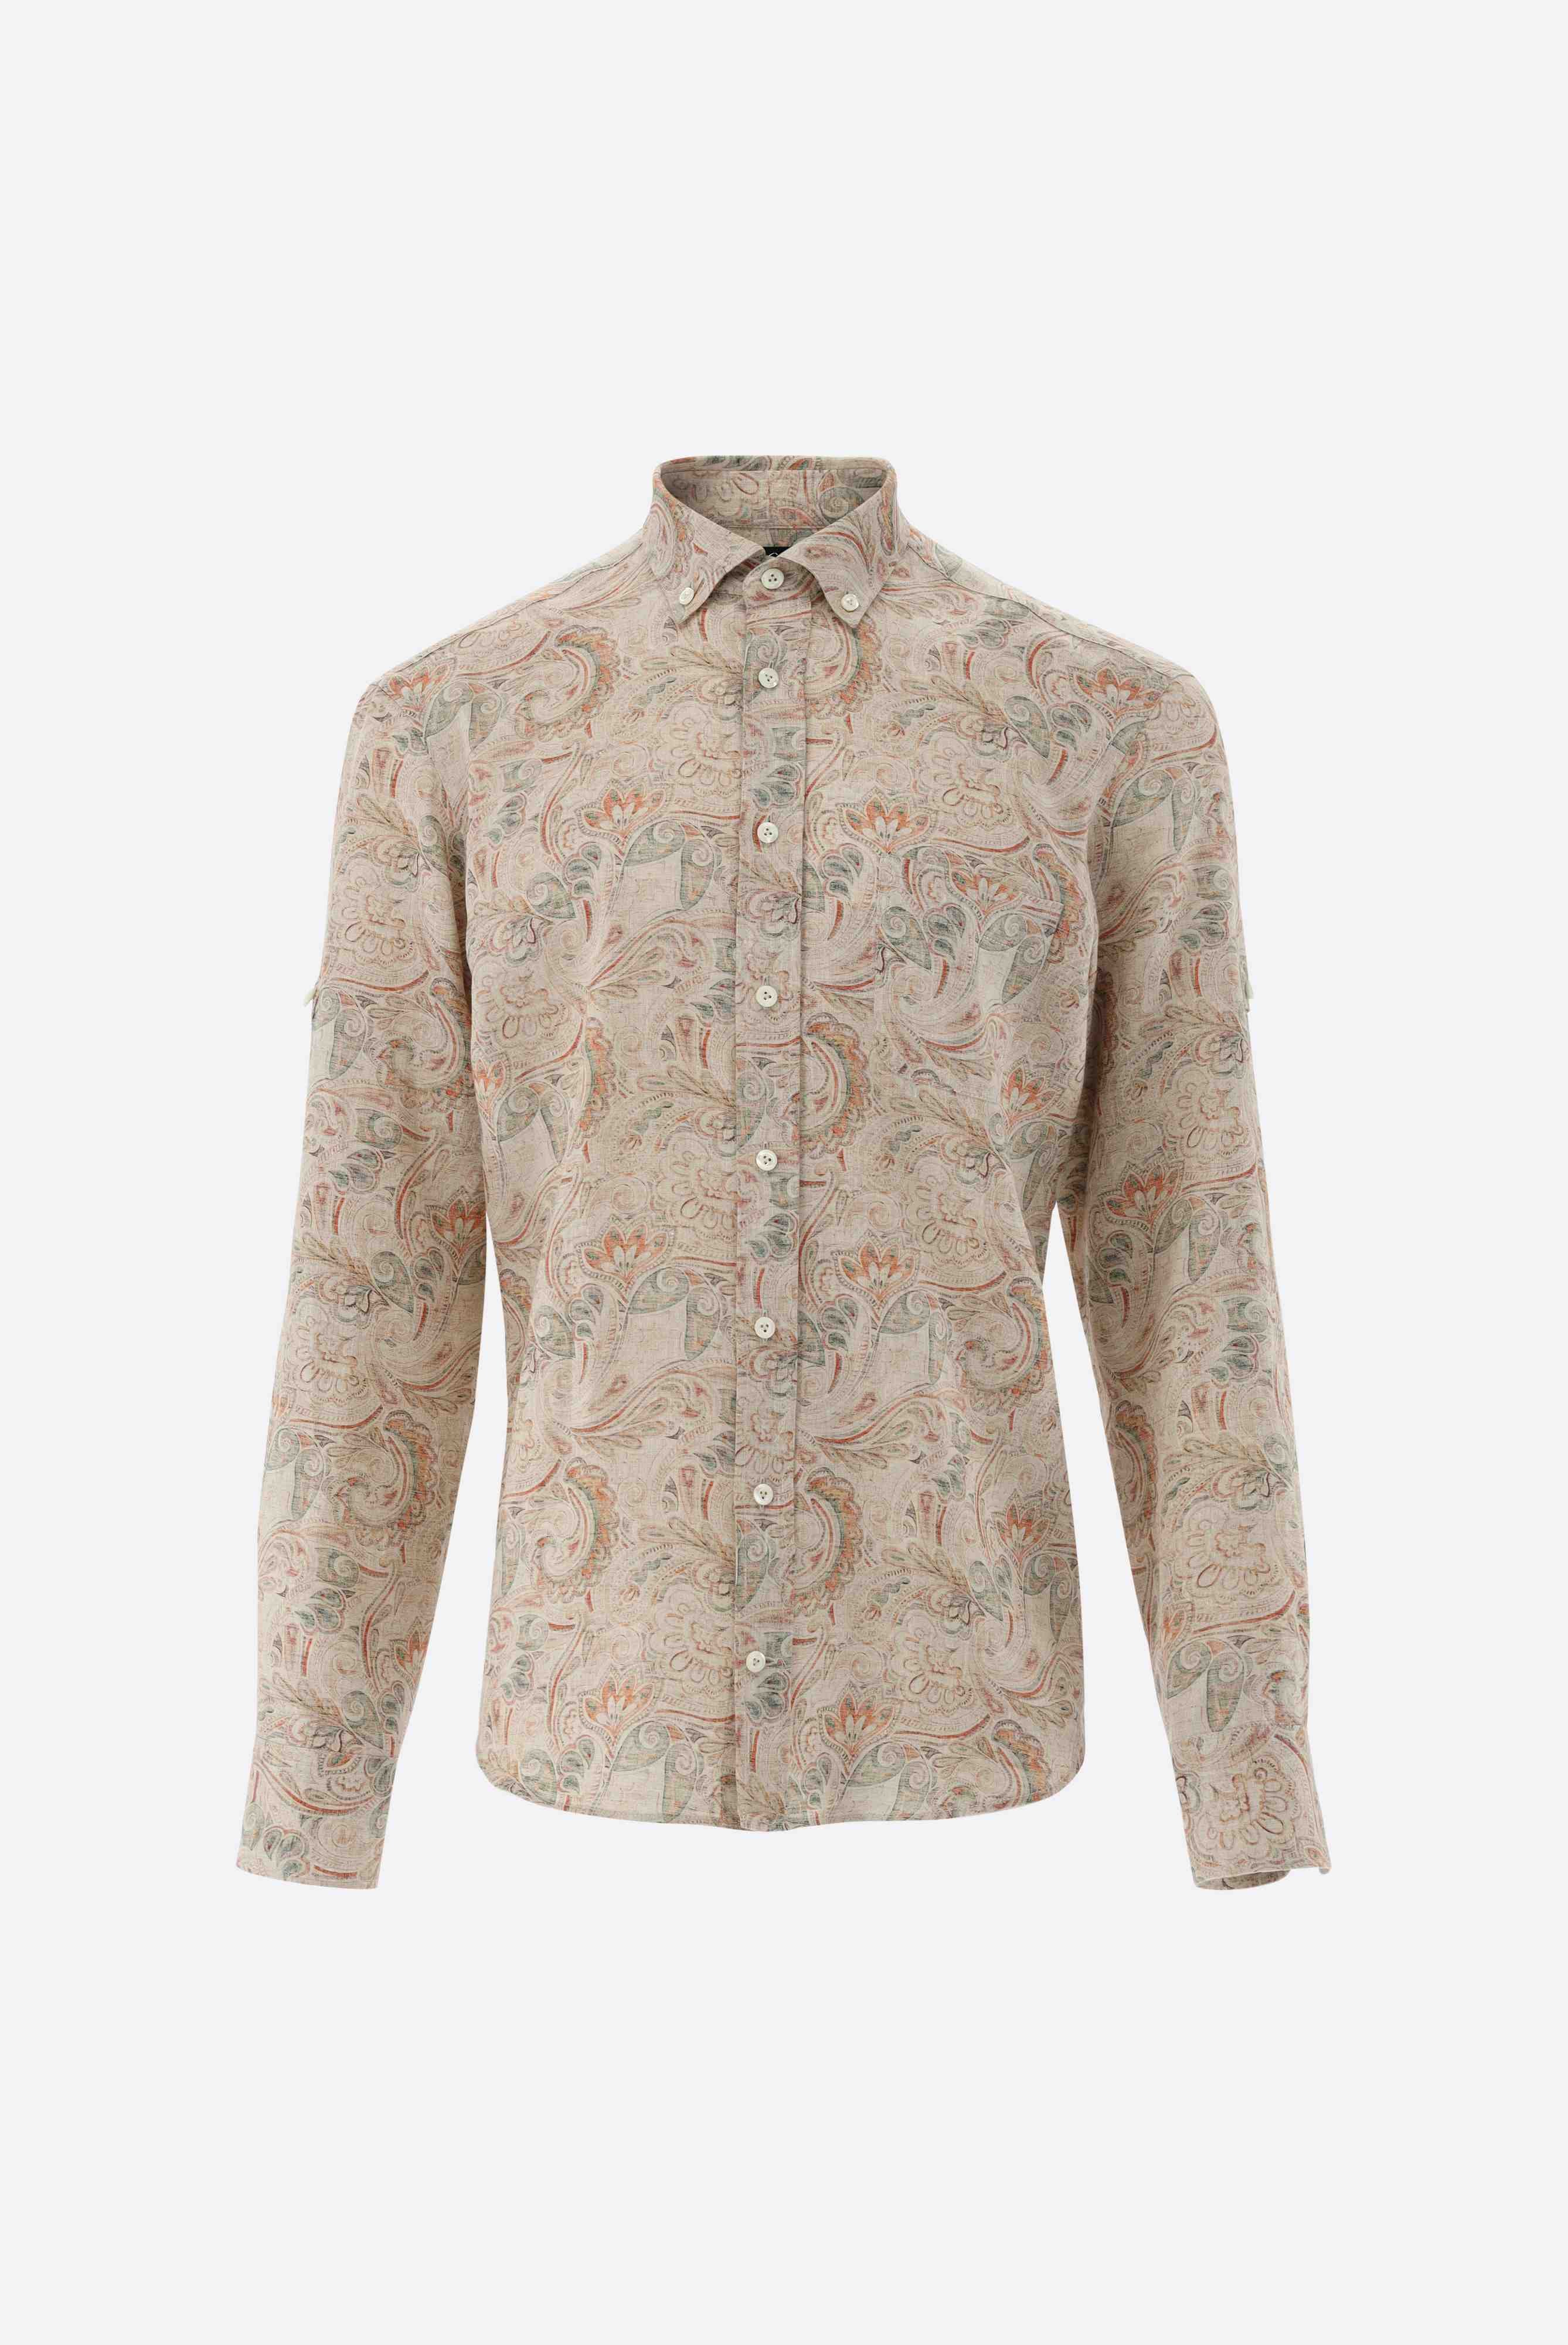 Casual Shirts+Linen Paisley-Printed Shirt Tailor Fit+20.2013.C4.172036.113.40